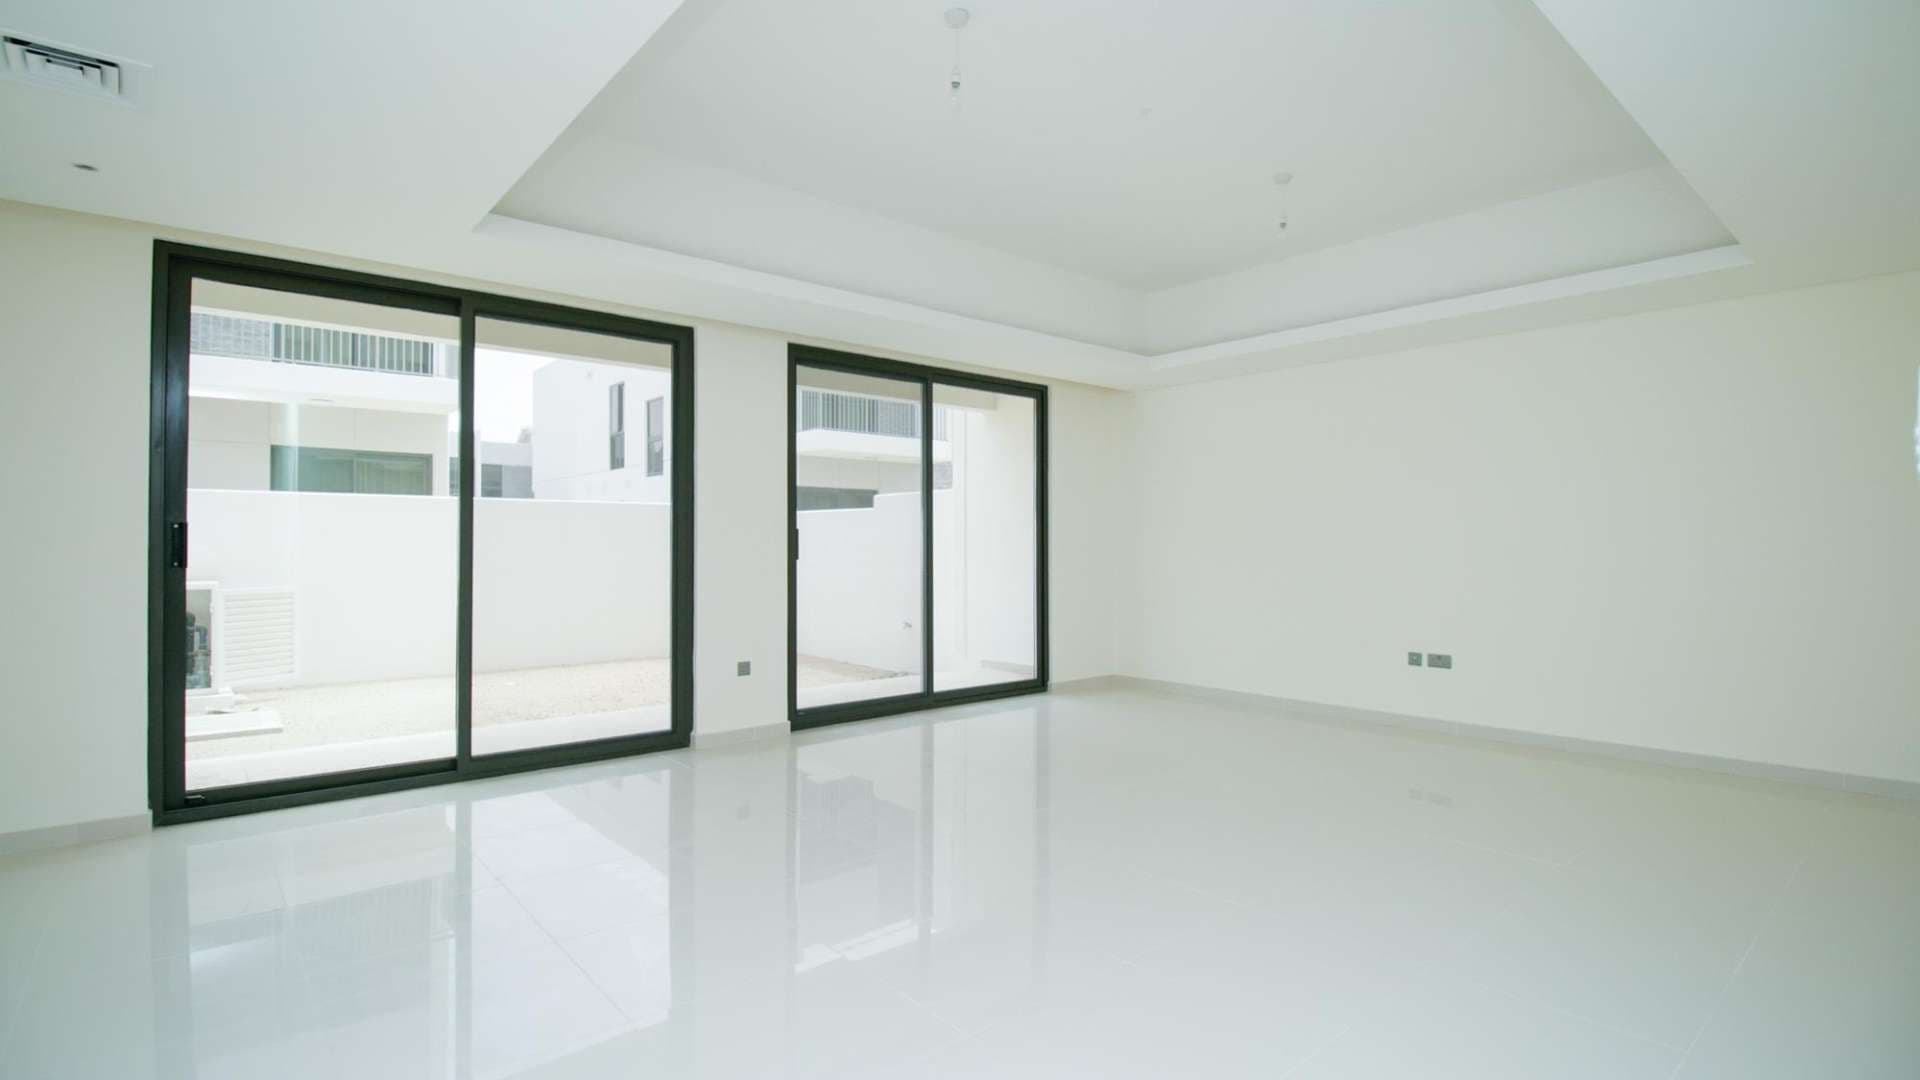 4 Bedroom Townhouse For Rent Aster Lp08134 3163821b3a06440.jpg